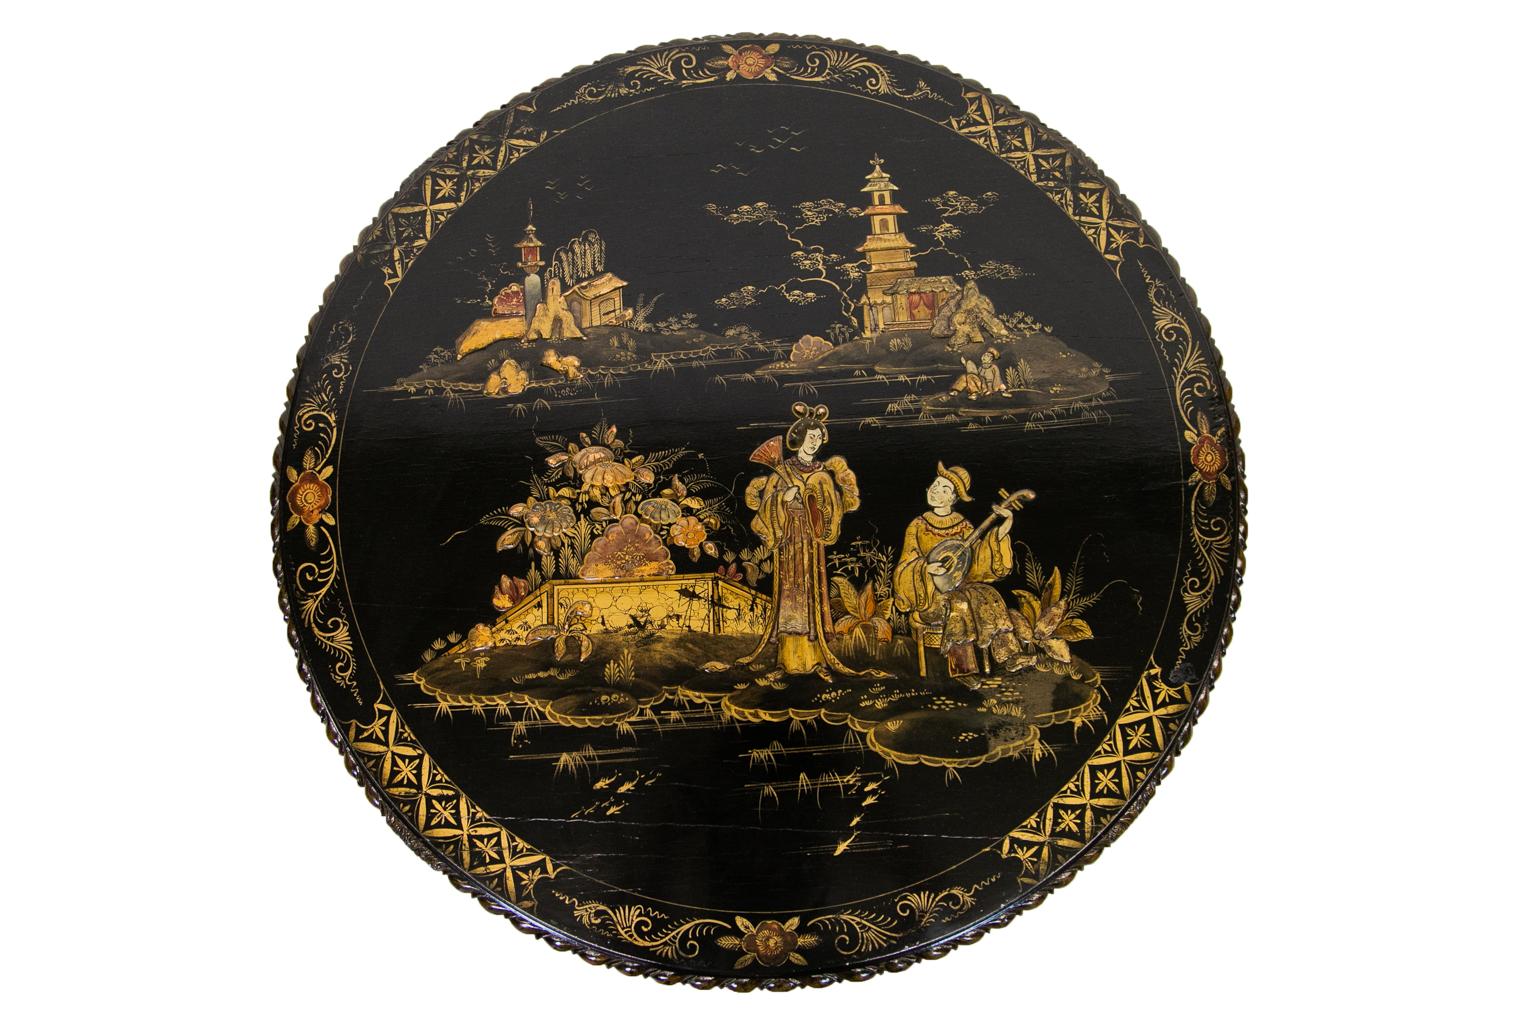 This coffee table is decorated with Chinoiserie figures raised in three dimensional relief depicting musicians, court figures, bridges, islands, and houses. The border has a carved gadrooned edge molding and has a two inch border band painted with